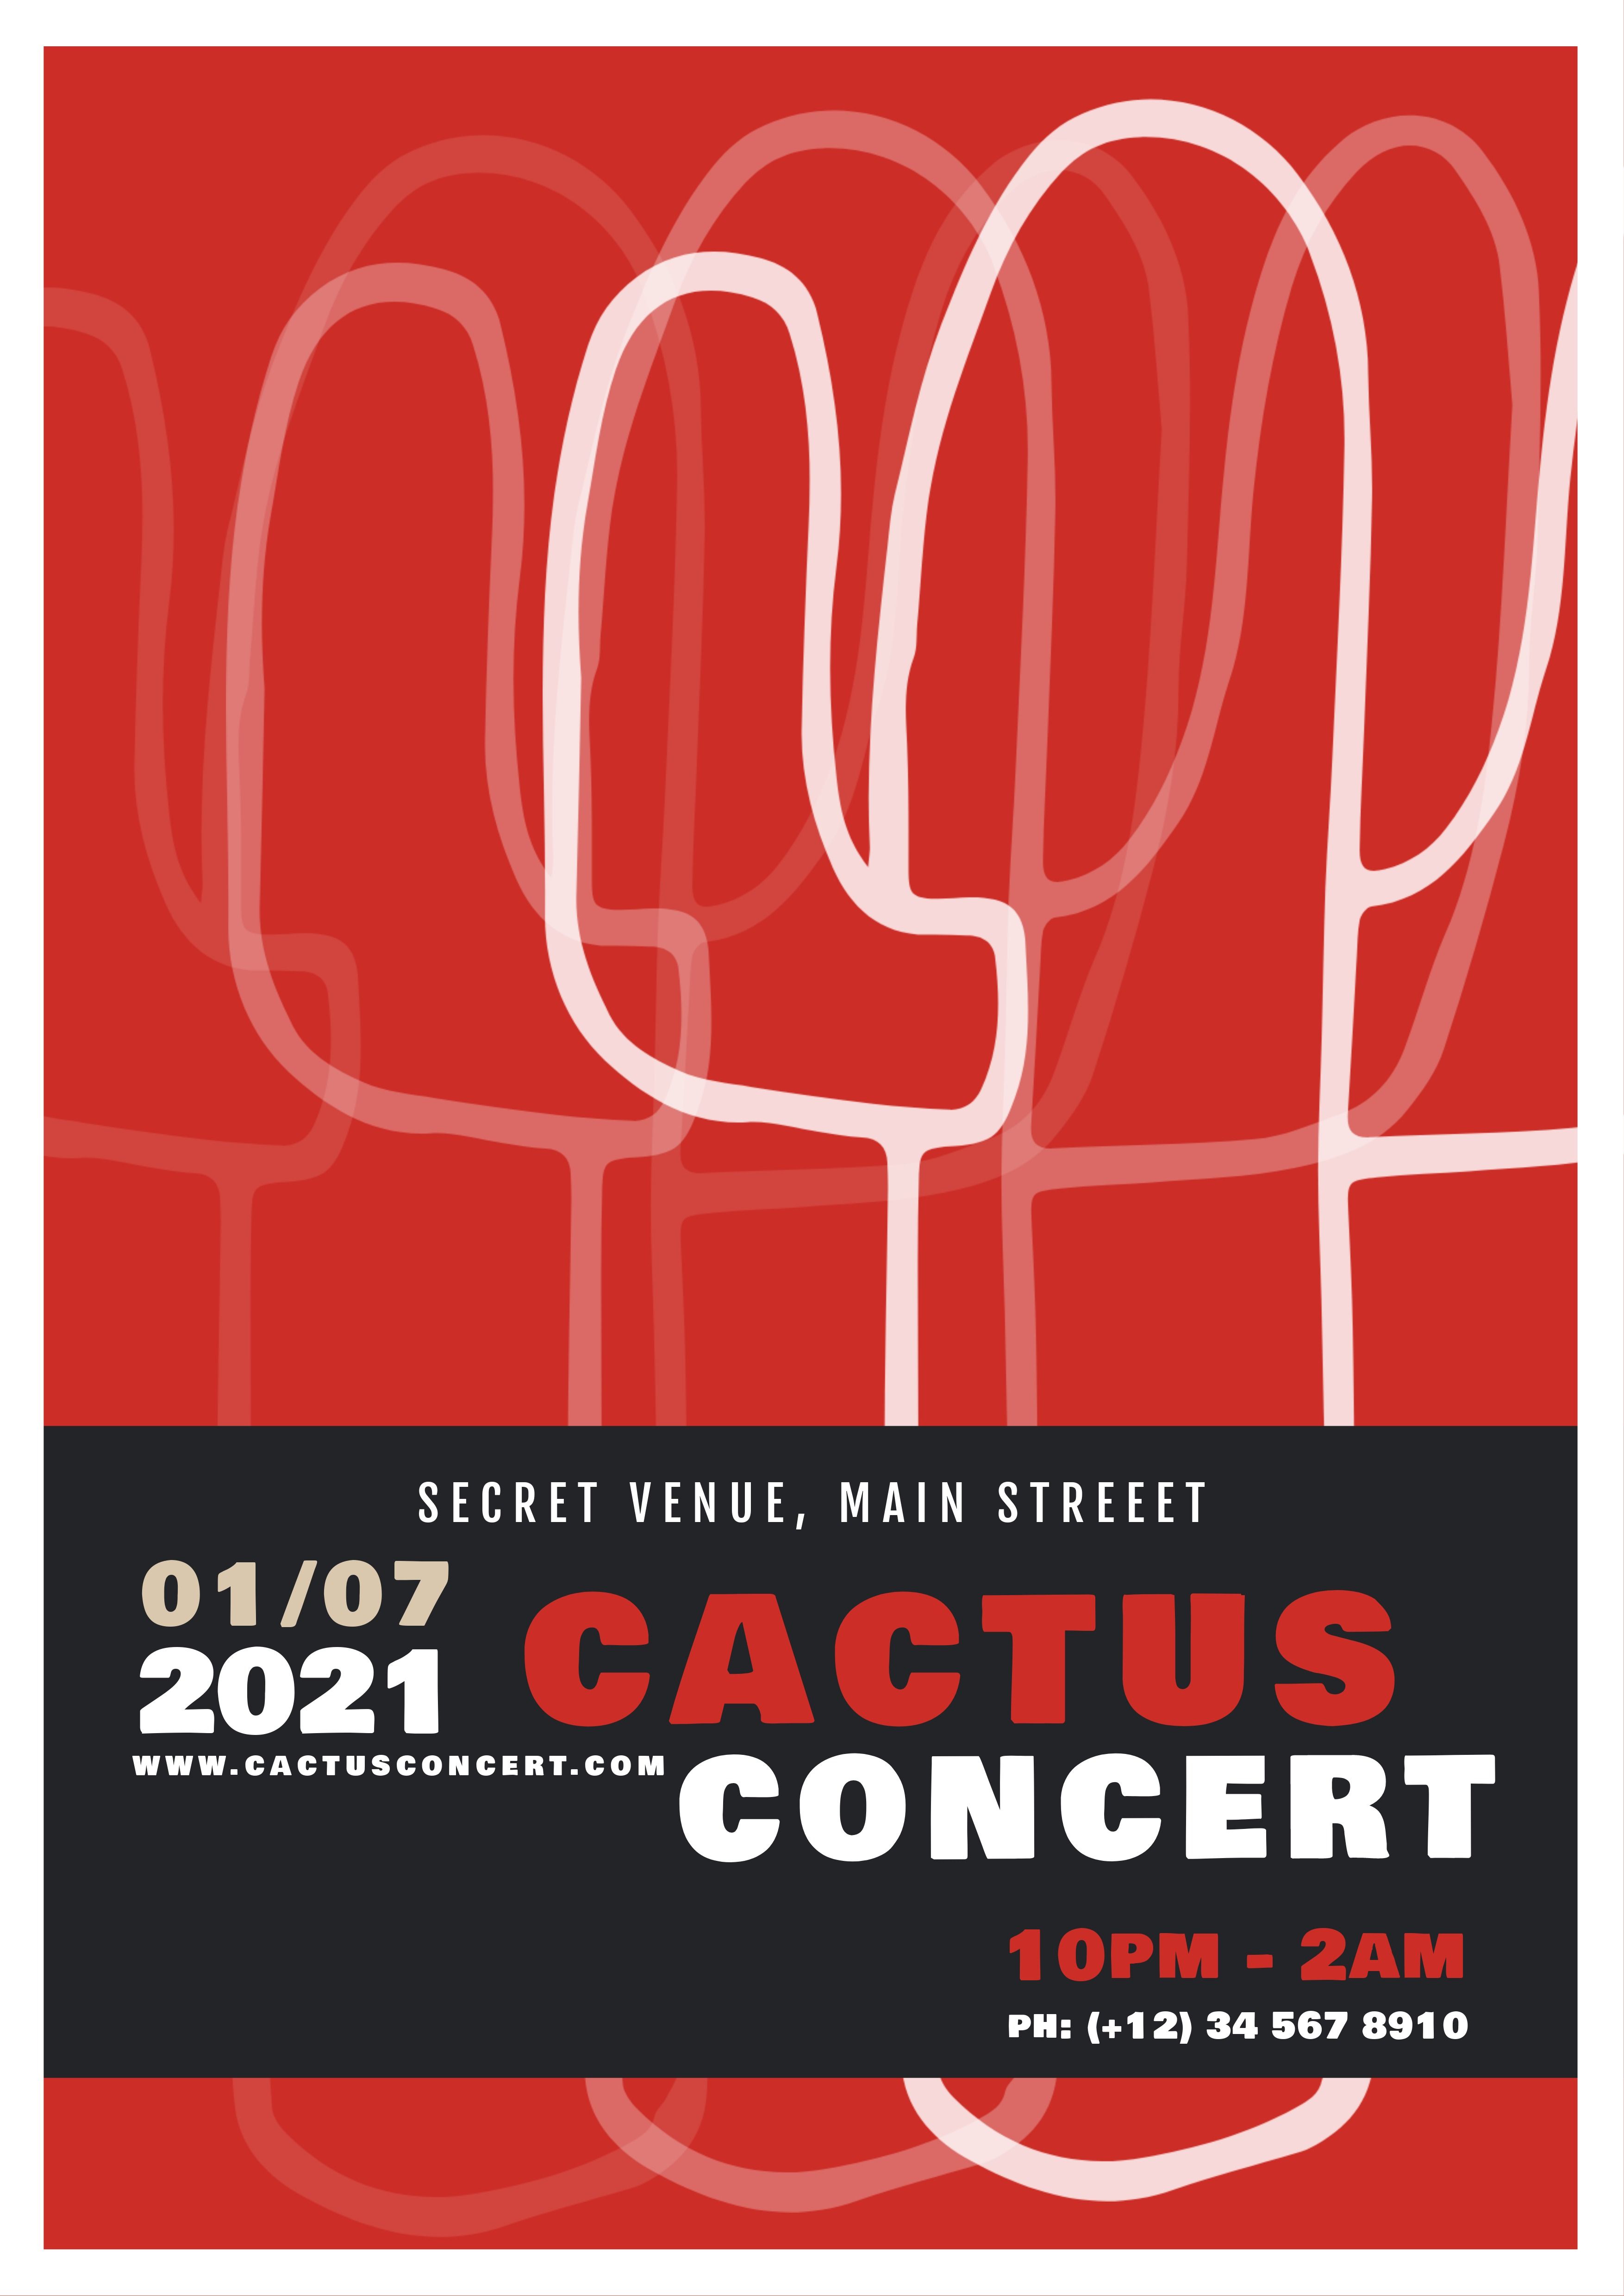 Event poster for rock concert - 14 Creative poster ideas & design tips - Image